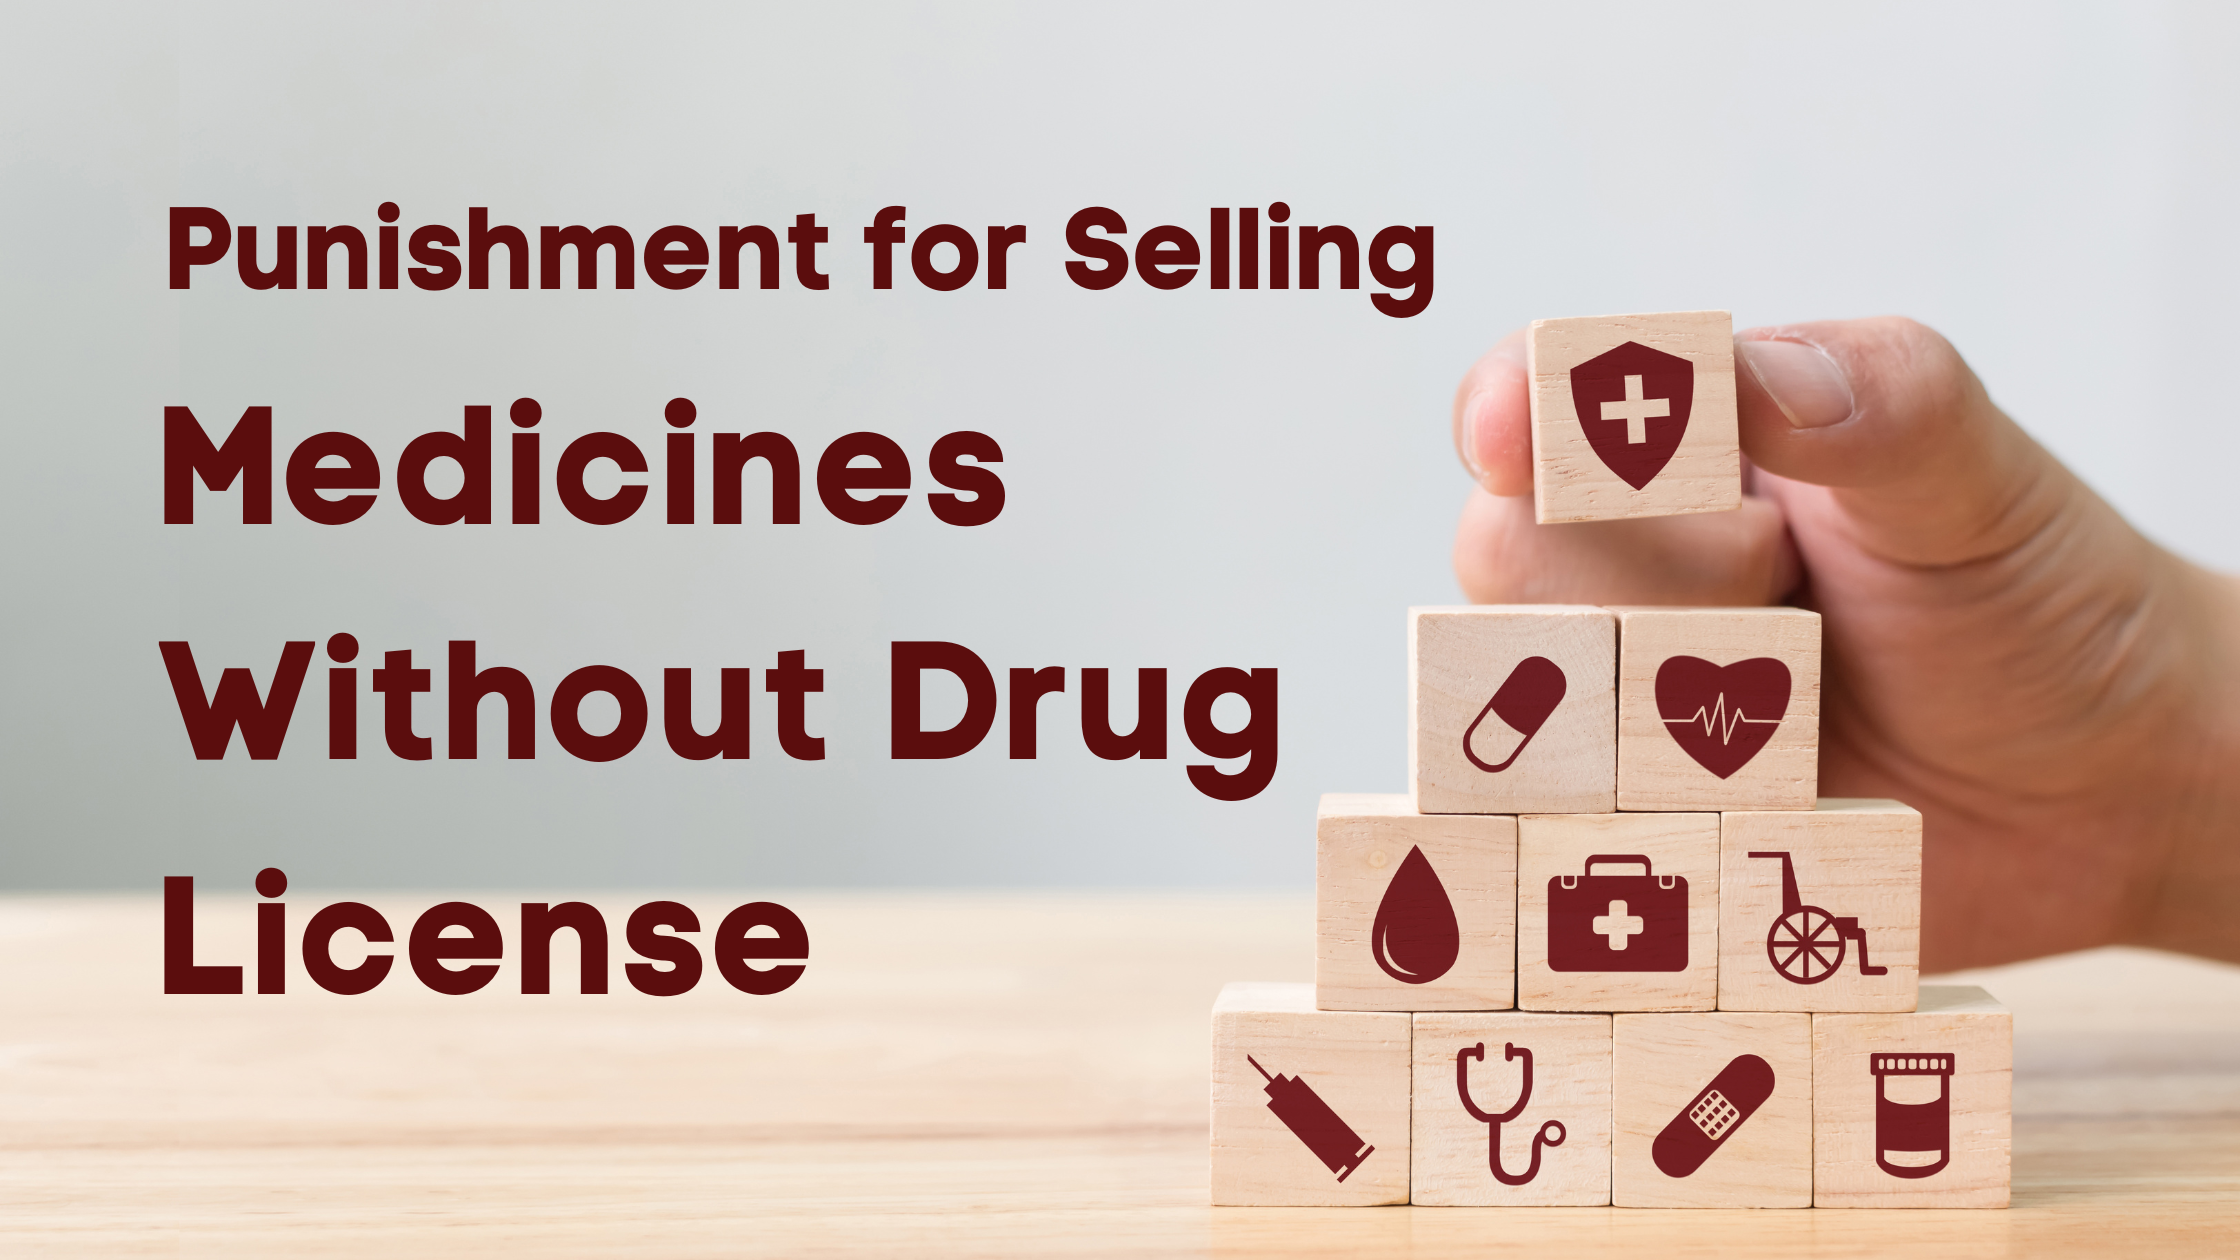 Punishment for Selling Medicines Without a Drug License